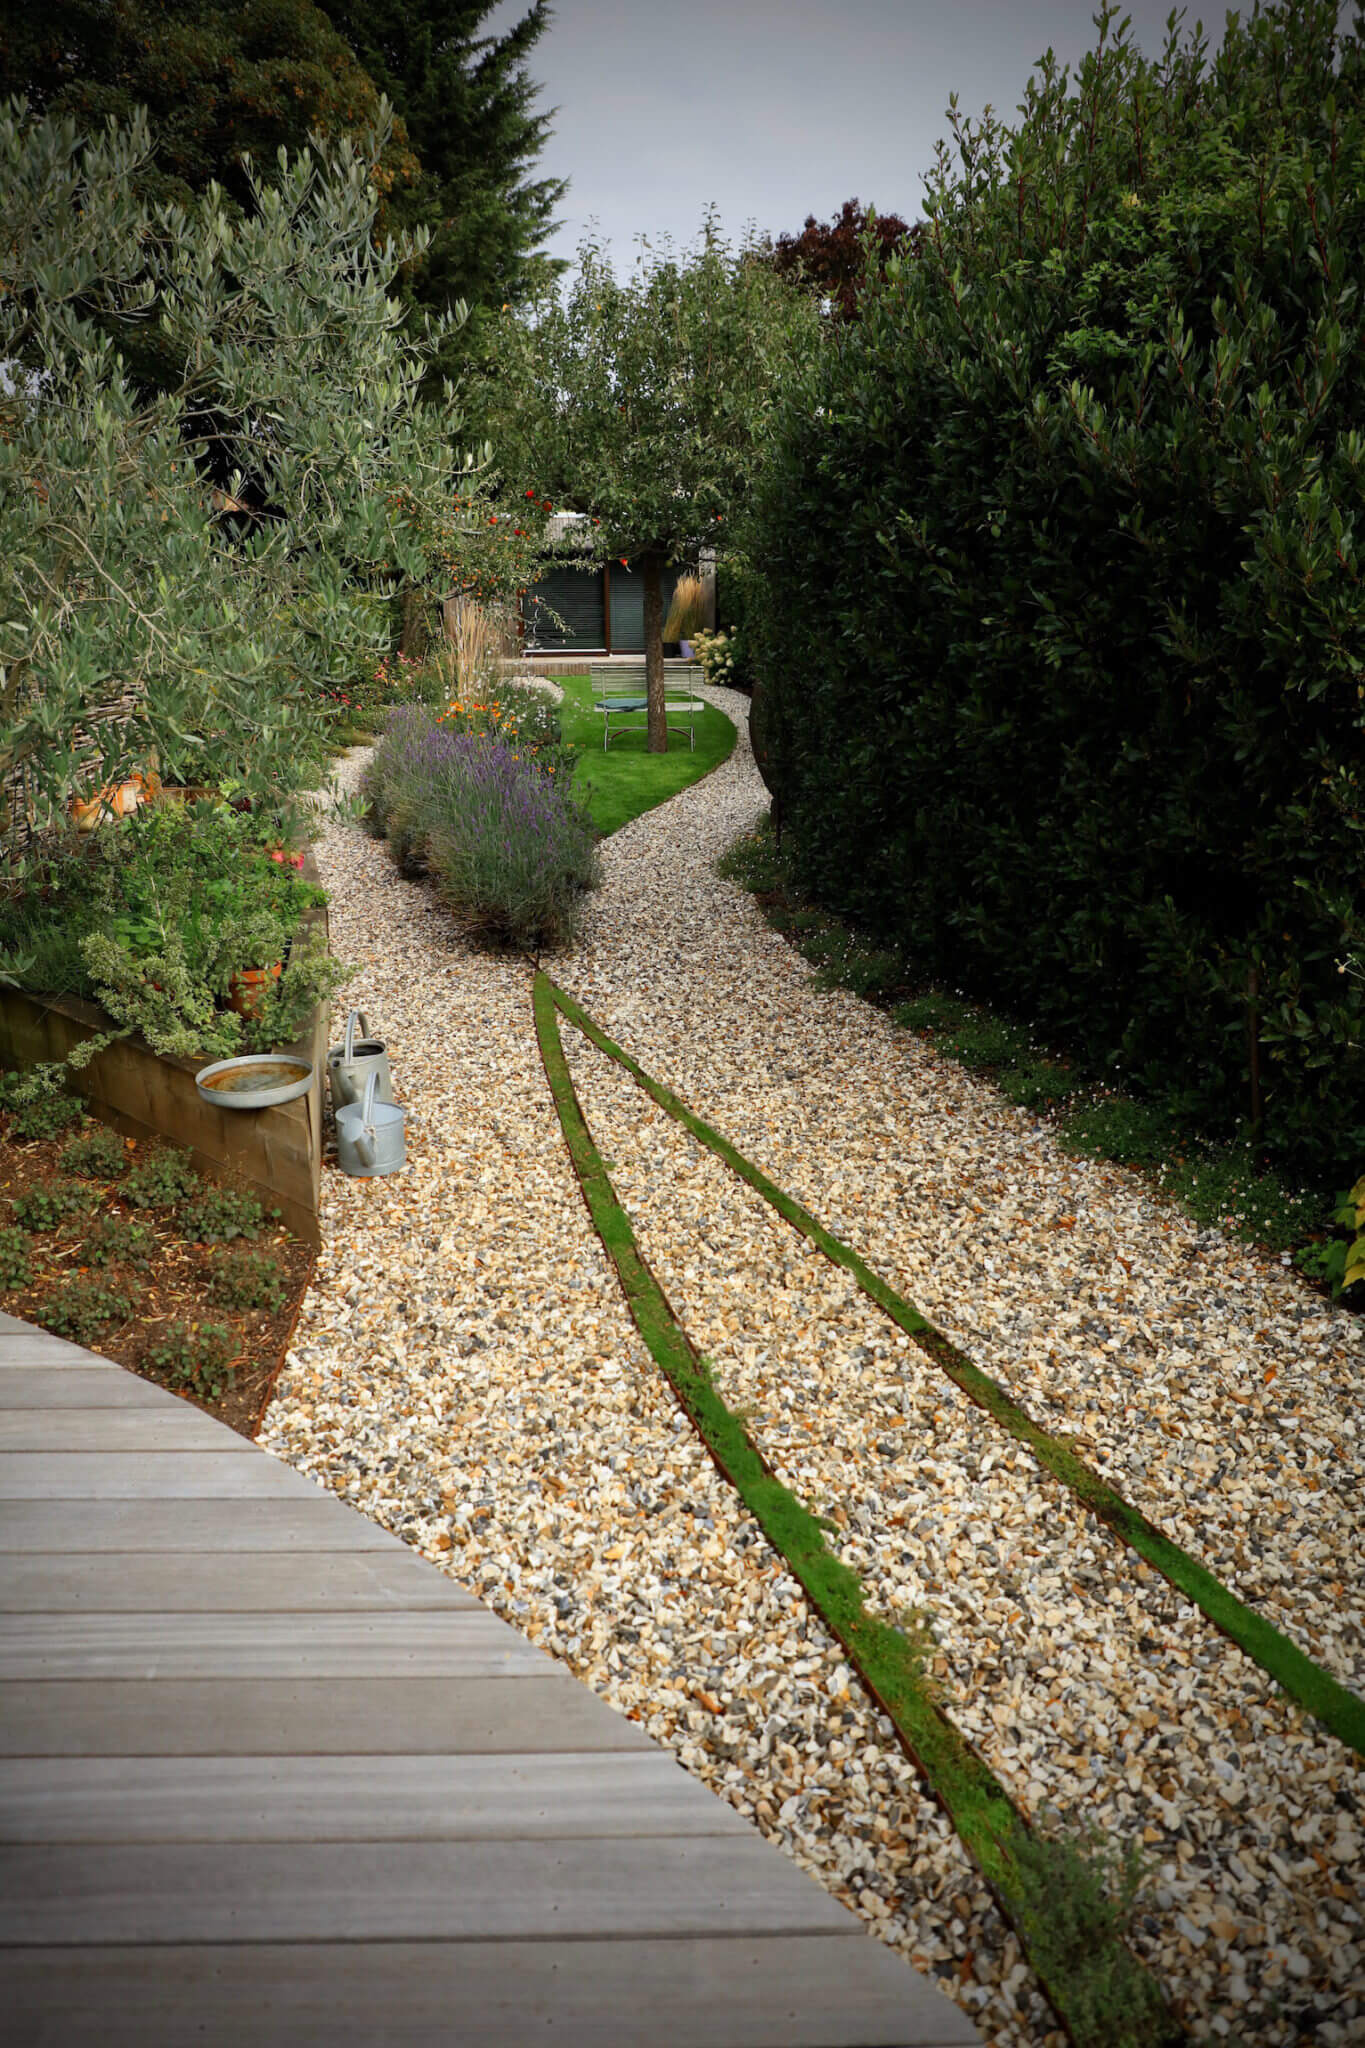 Over head shot of stone pathway and lavender bushes